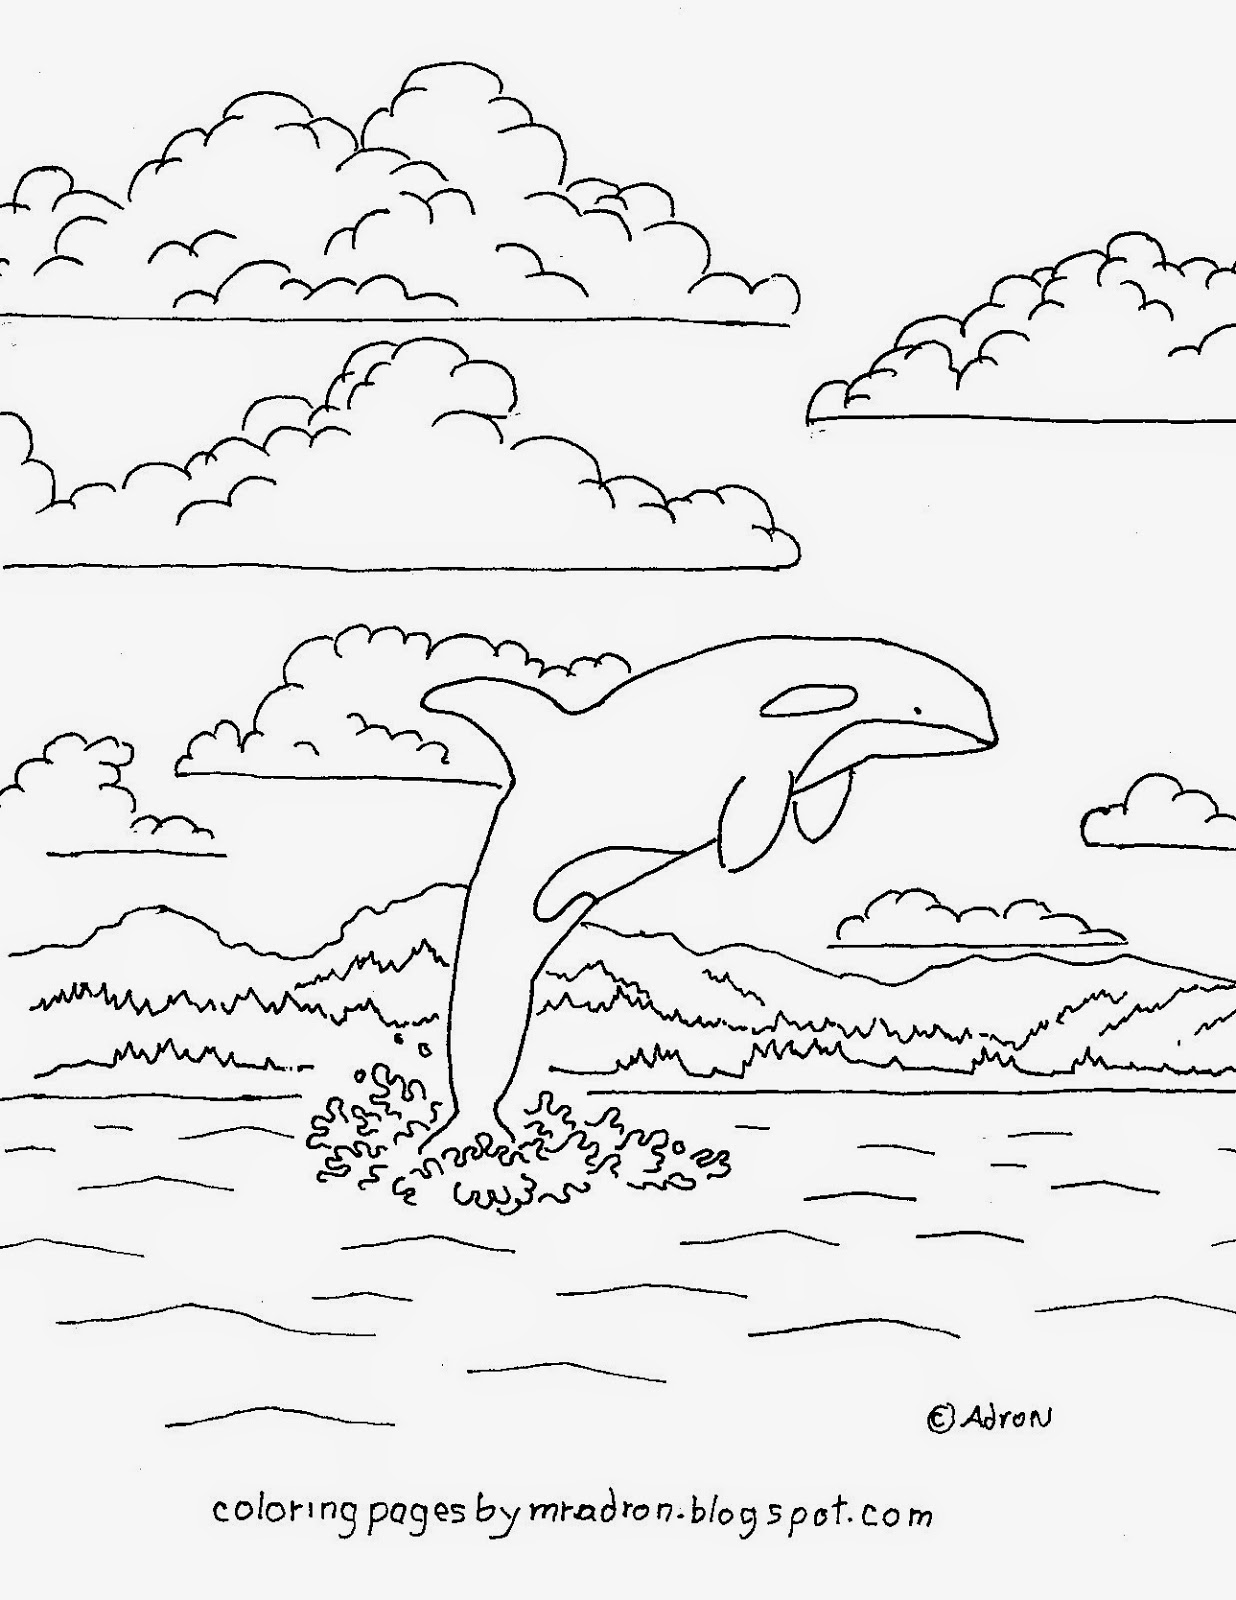 Coloring Pages for Kids by Mr. Adron: Orca Killer Whale Jumping Out Of The Water Coloring Page ...